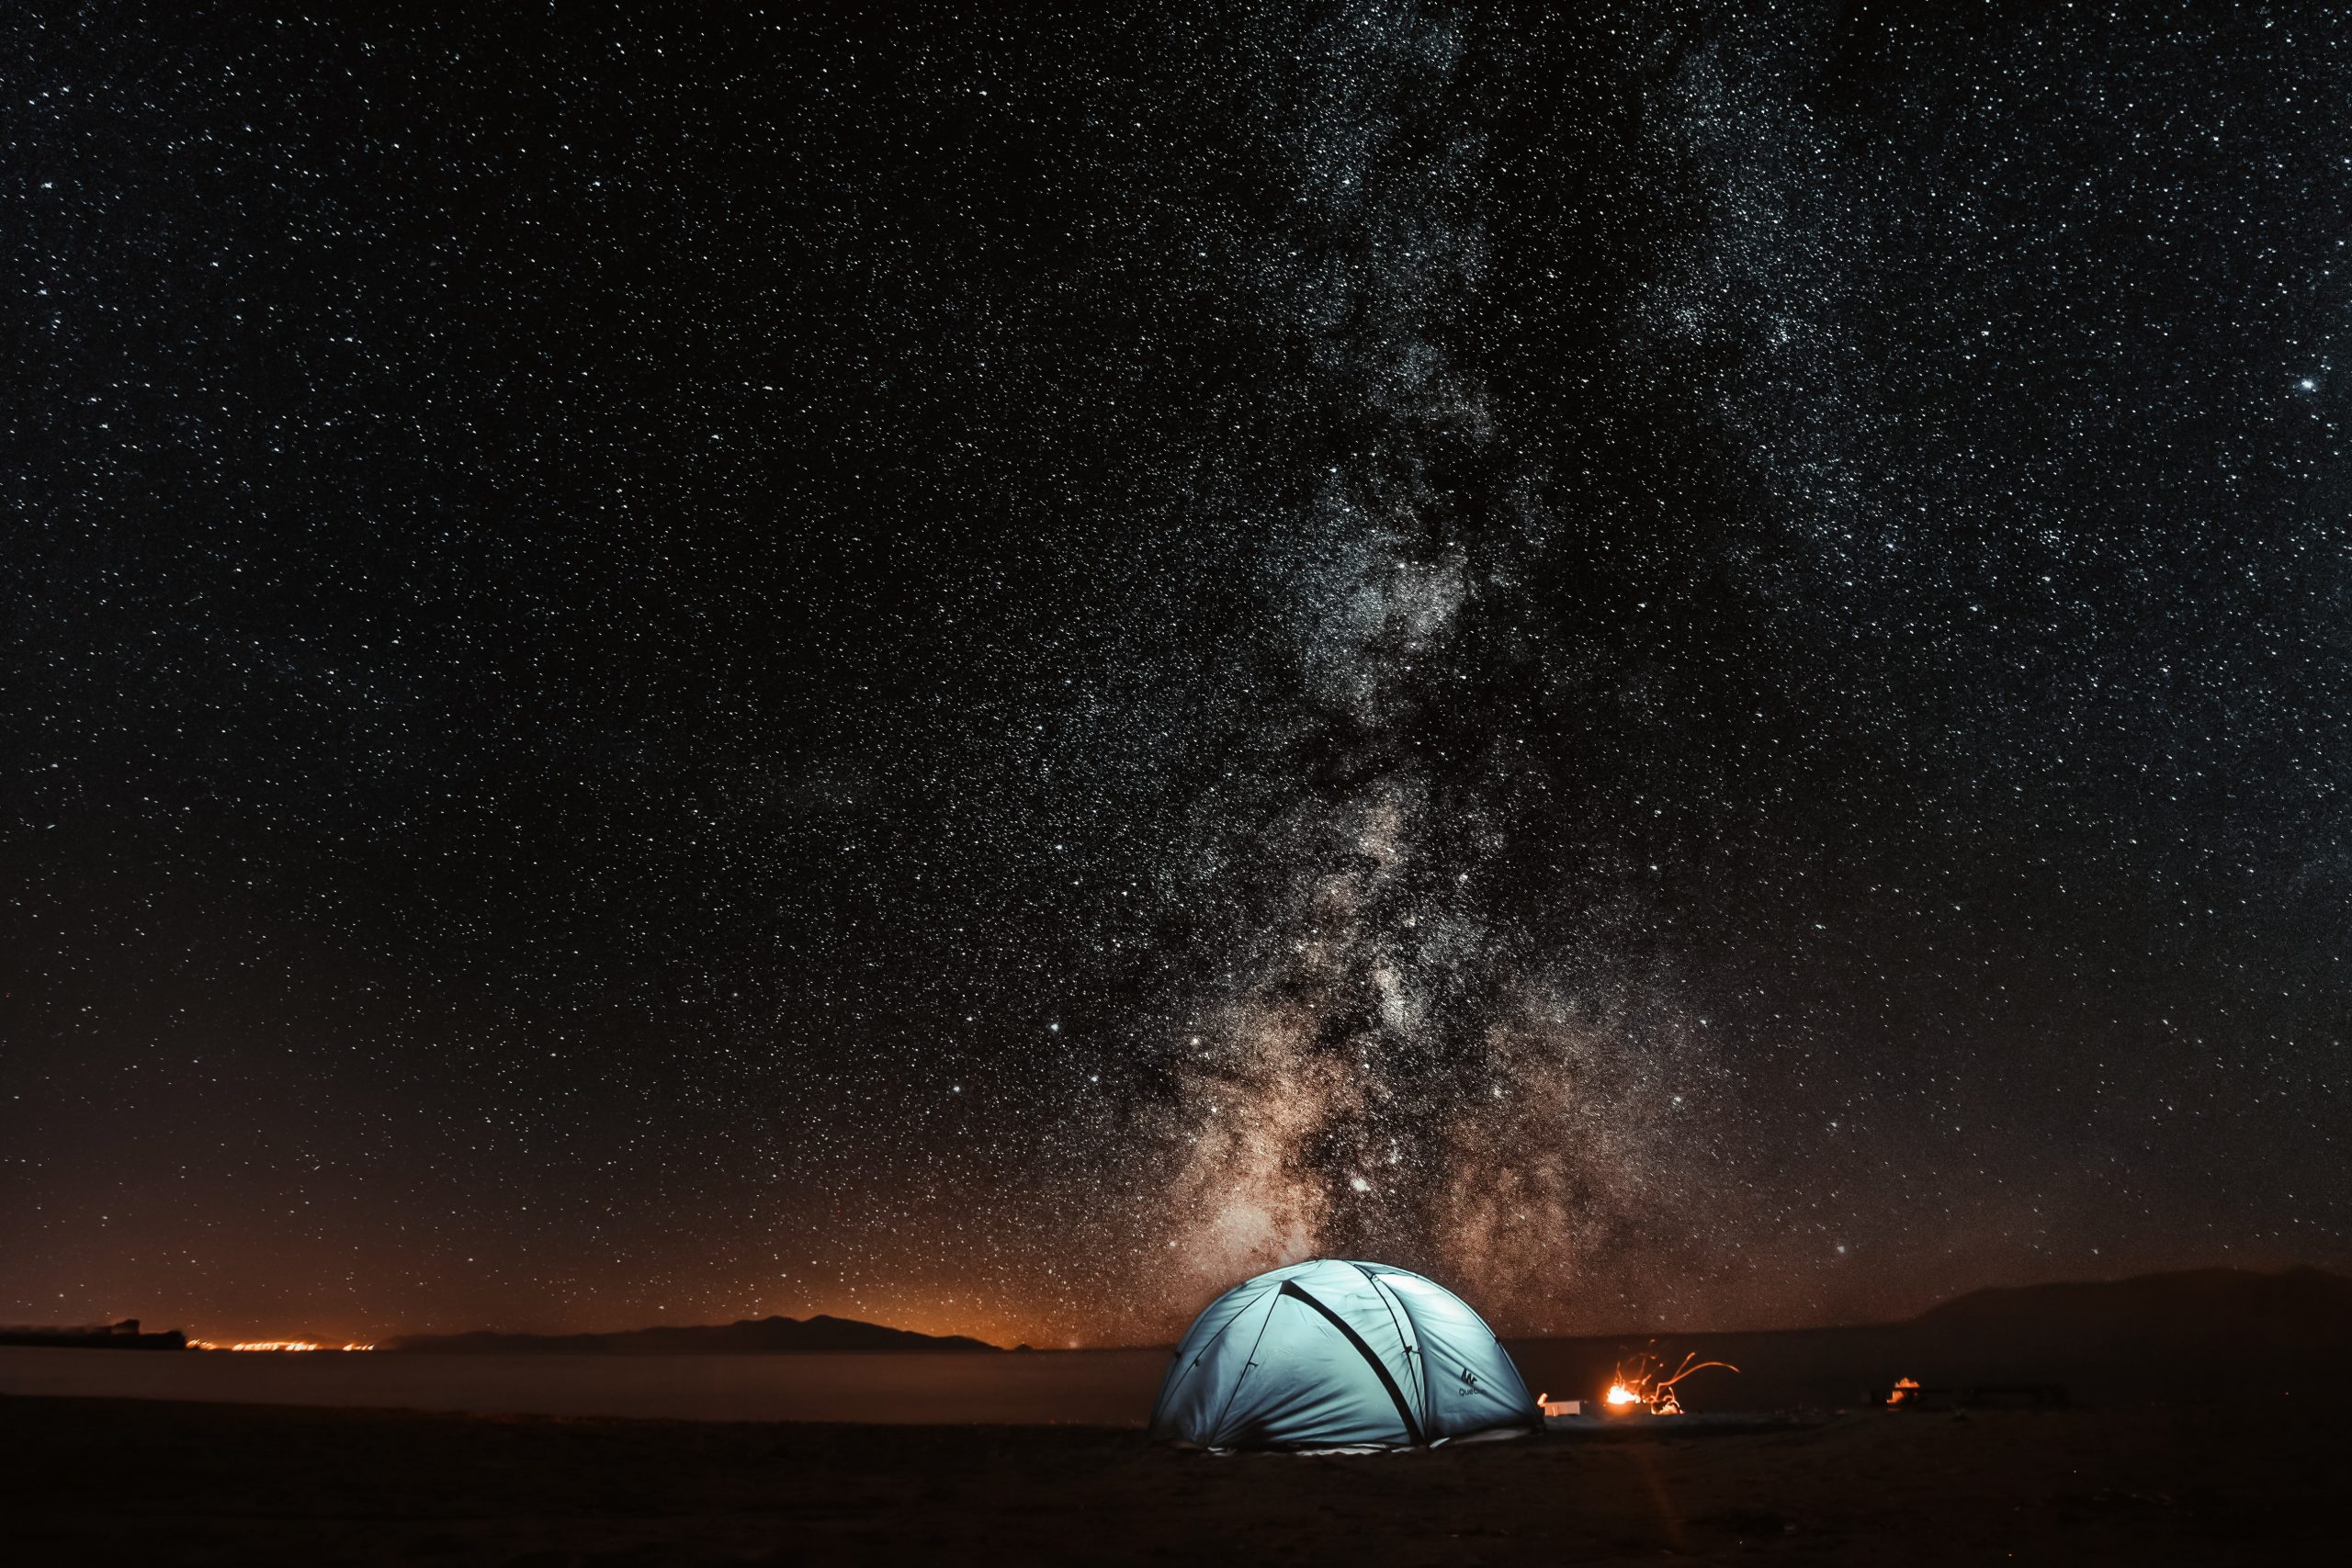 Camping at Night under the Milky Way